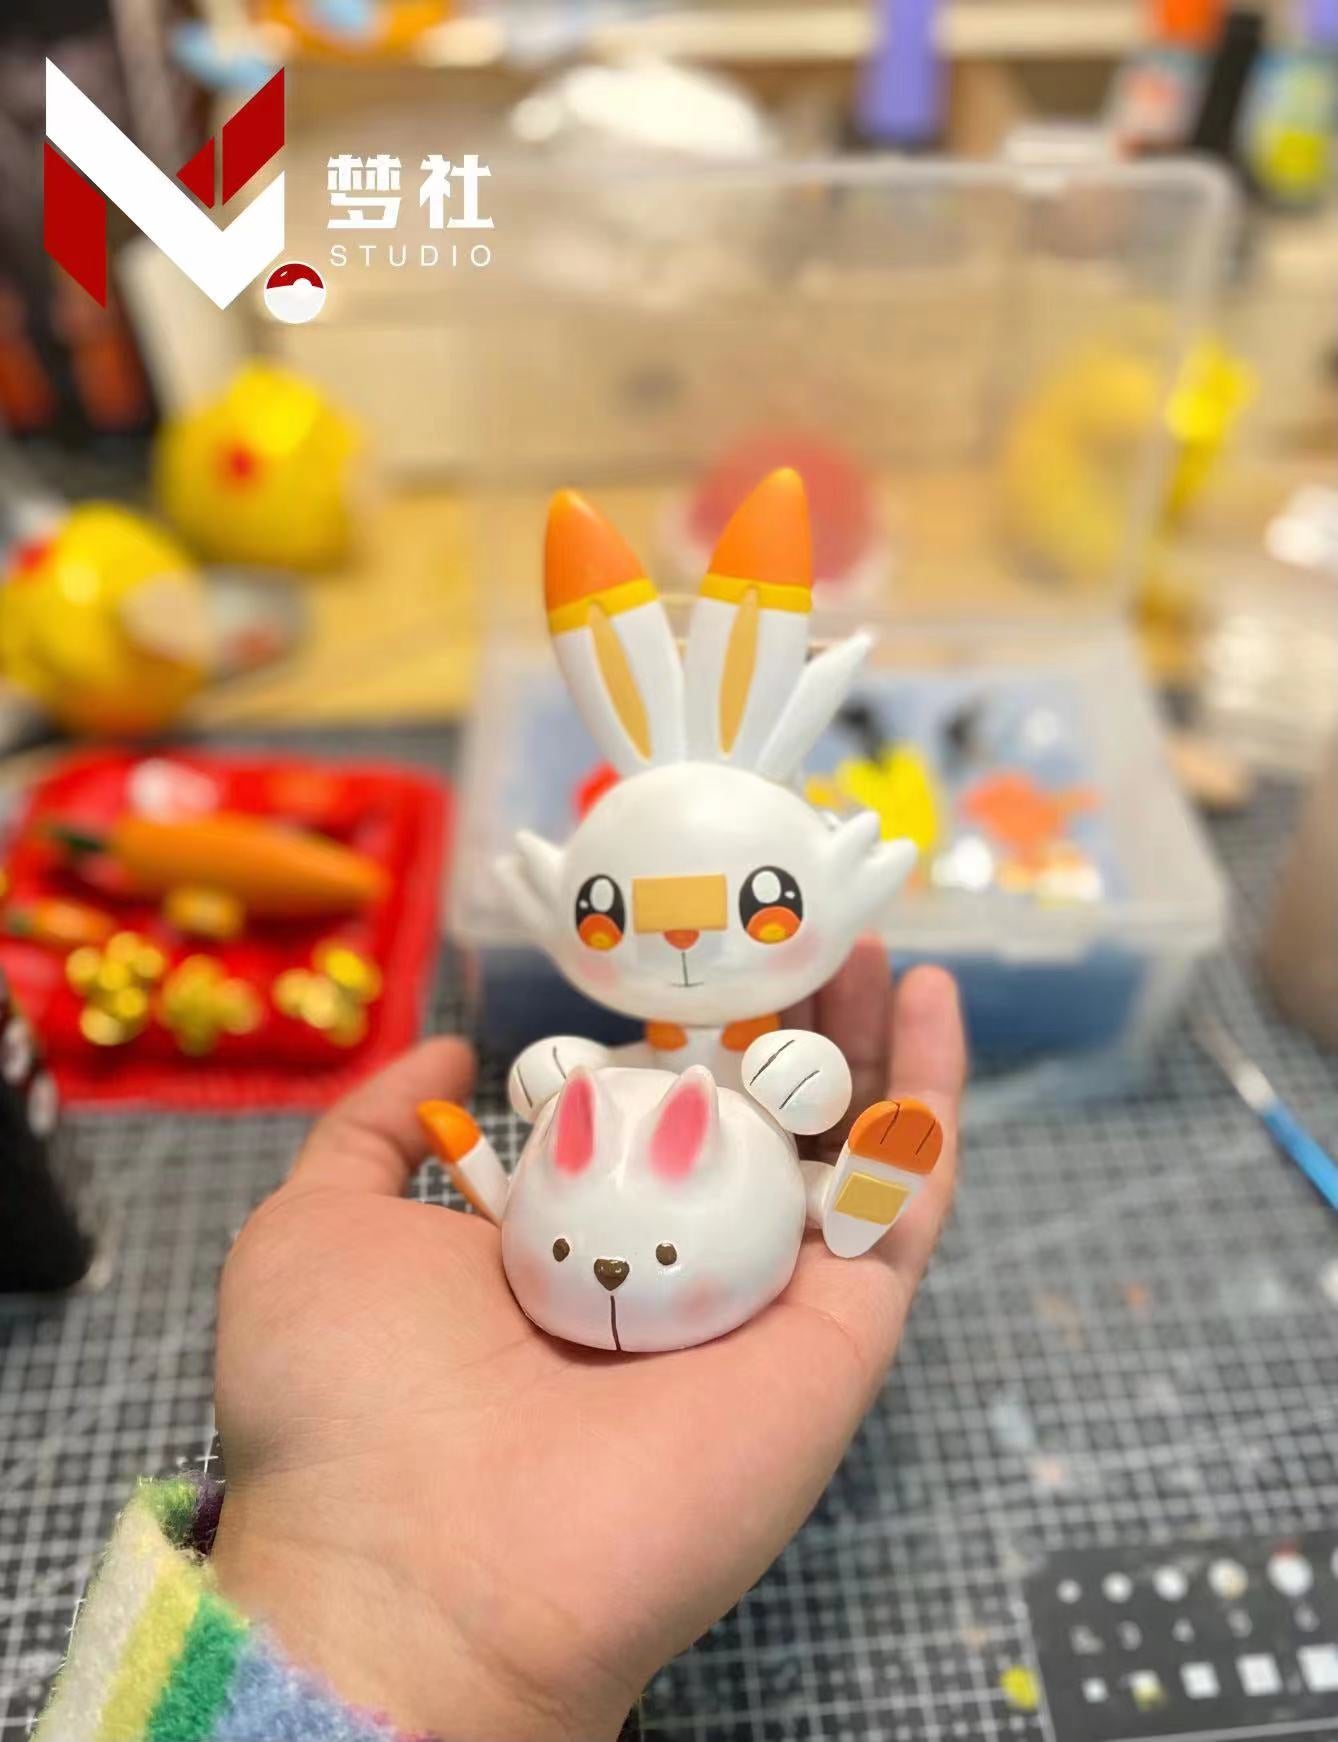 〖Sold Out〗Pokémon Peripheral Products Scorbunny - MS Studio